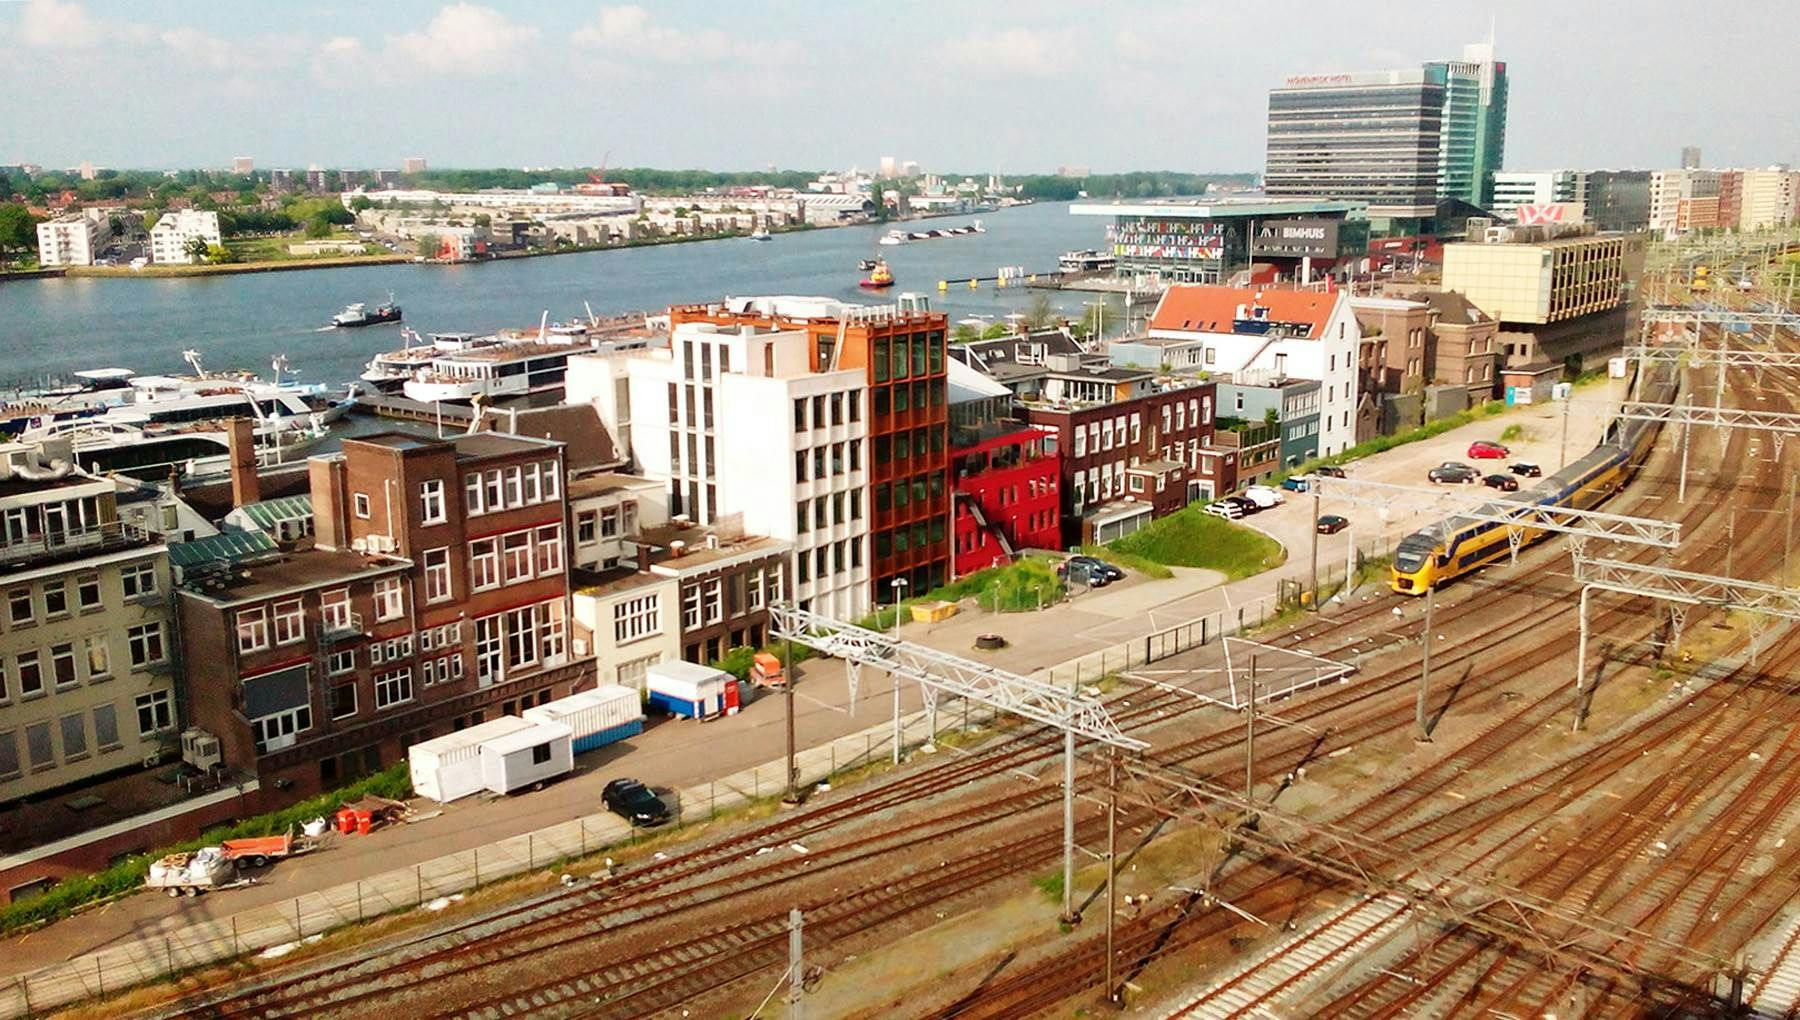 Train tracks in Amsterdam with IJ river visible behind buildings.